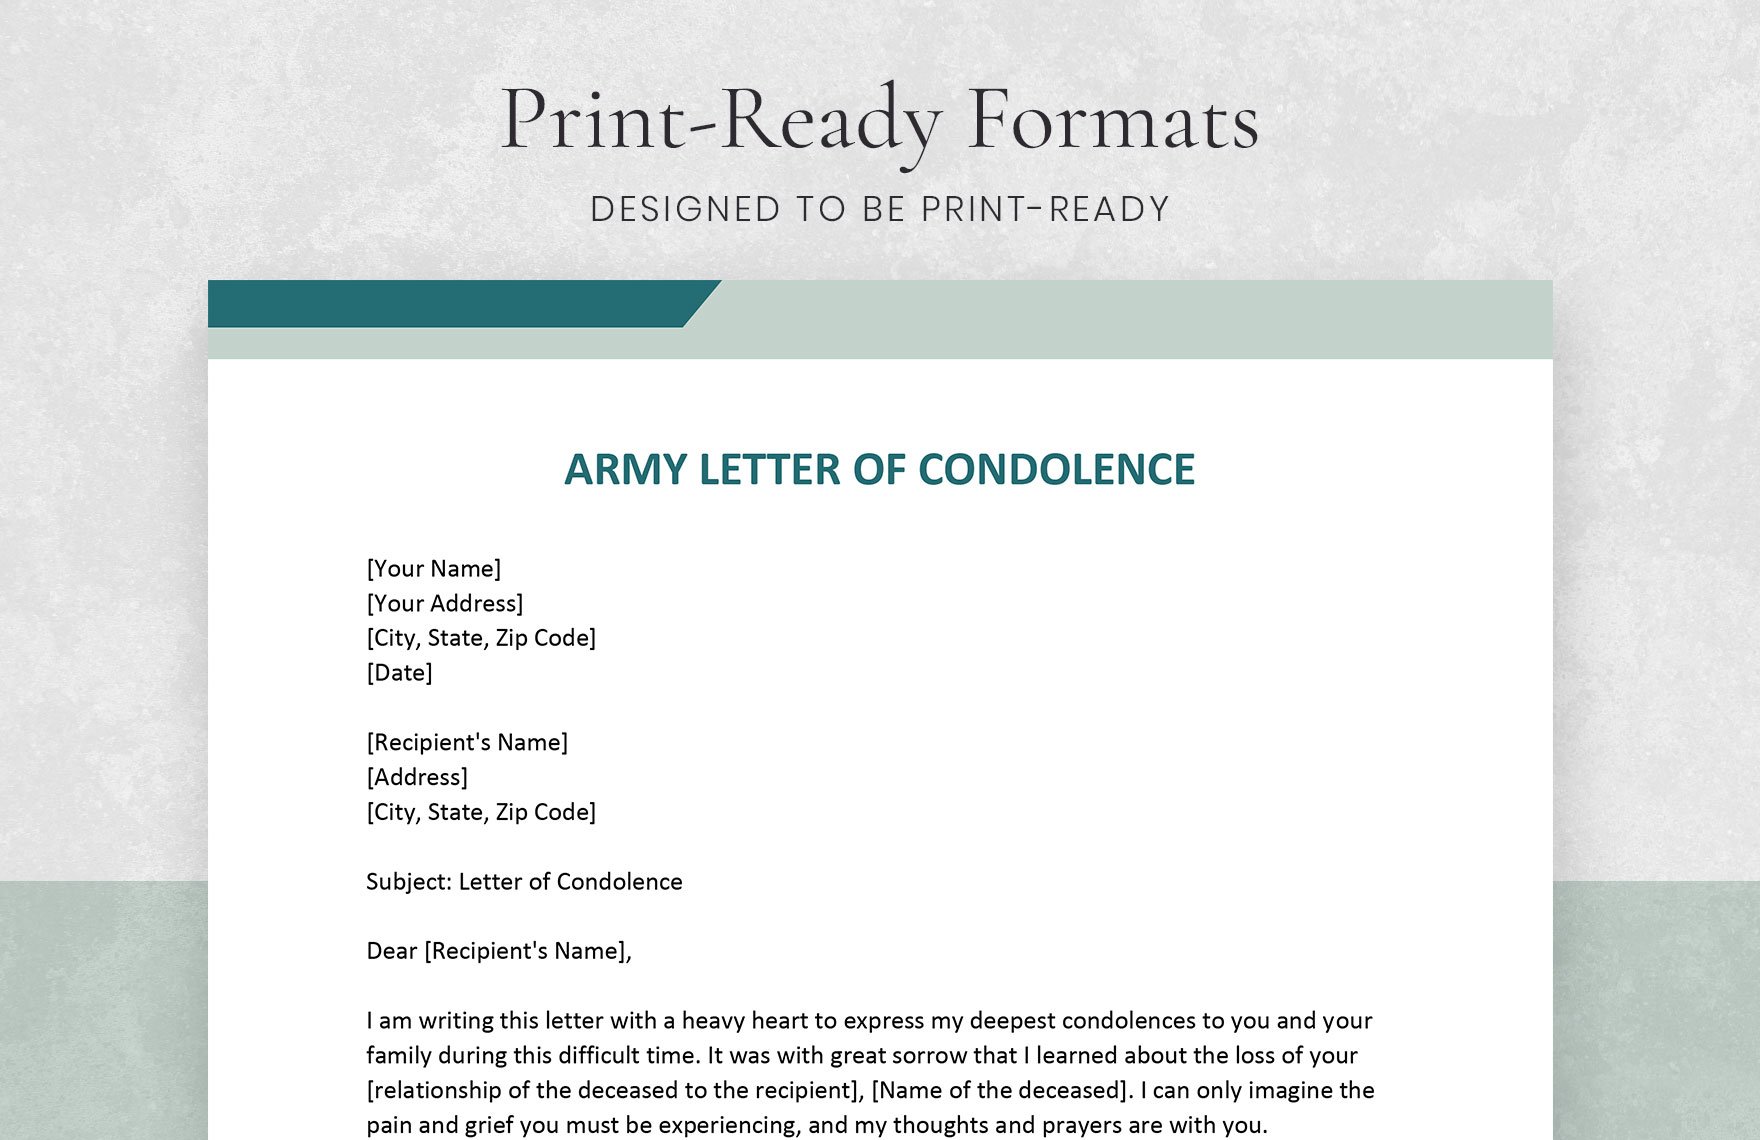 Army Letter of Condolence